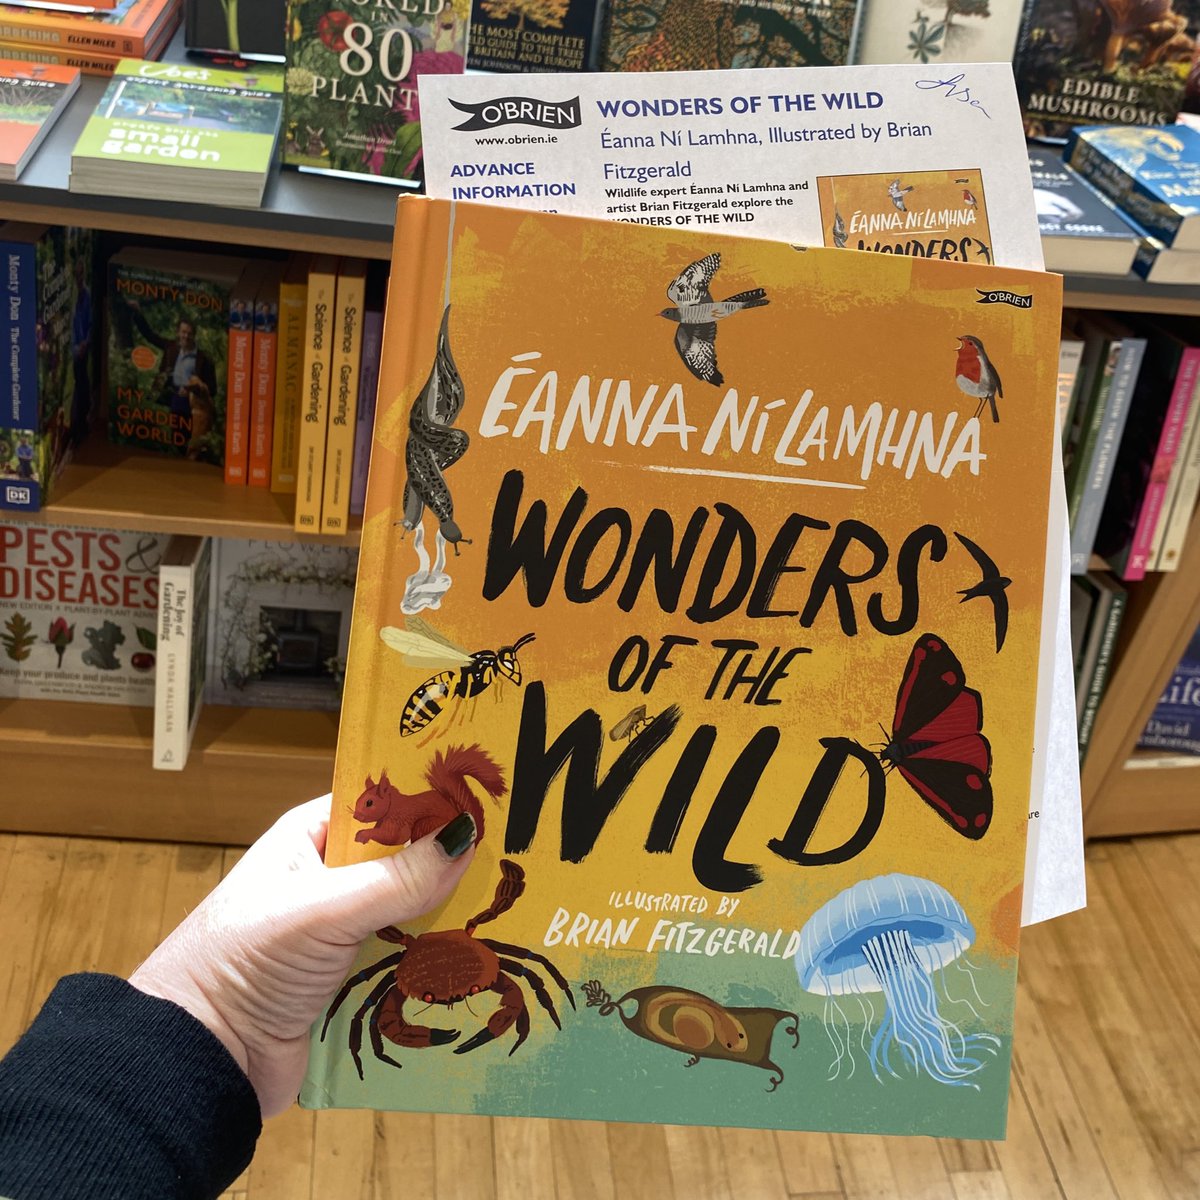 More book post 🎉 delighted to get an advance copy from @OBrienPress of #WondersOfTheWild by #EannaNiLamhna and illustrations by @brianfitzer - get your copy in October! 

#PerksOfBeingABookseller in @omahonysbooks 
#ChildrensBooks #naturebooksforkids #DiscoverIrishKidsBooks